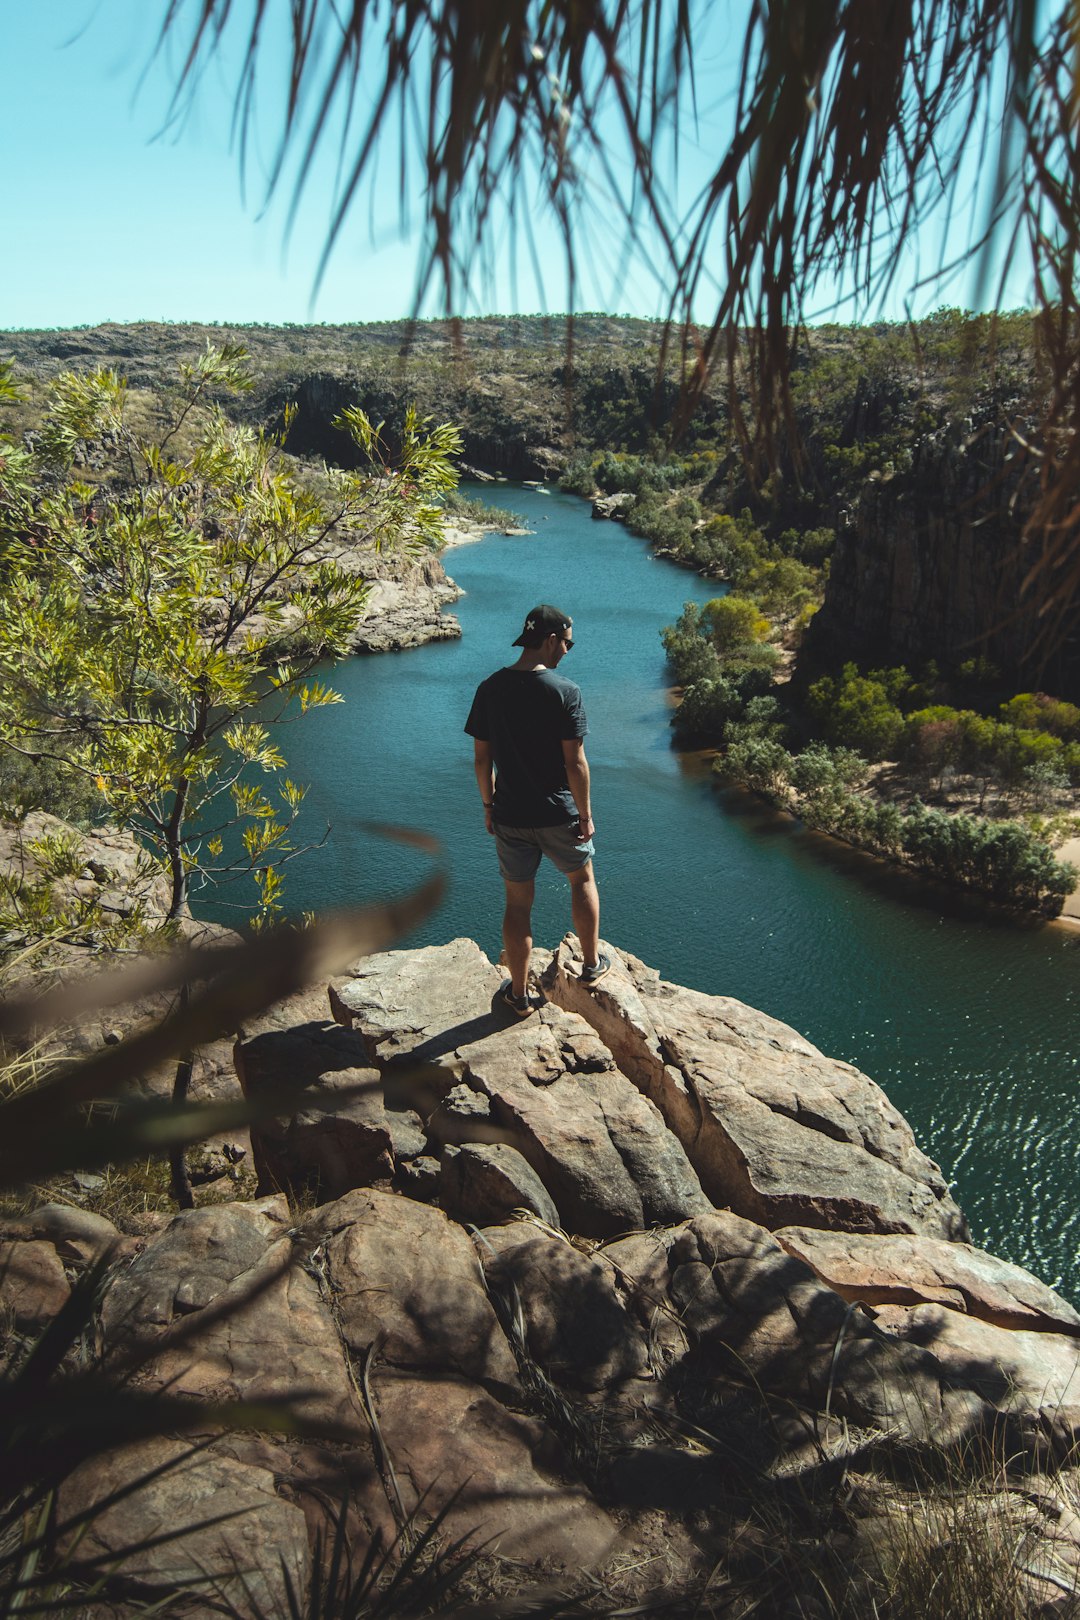 travelers stories about River in Katherine Gorge, Australia